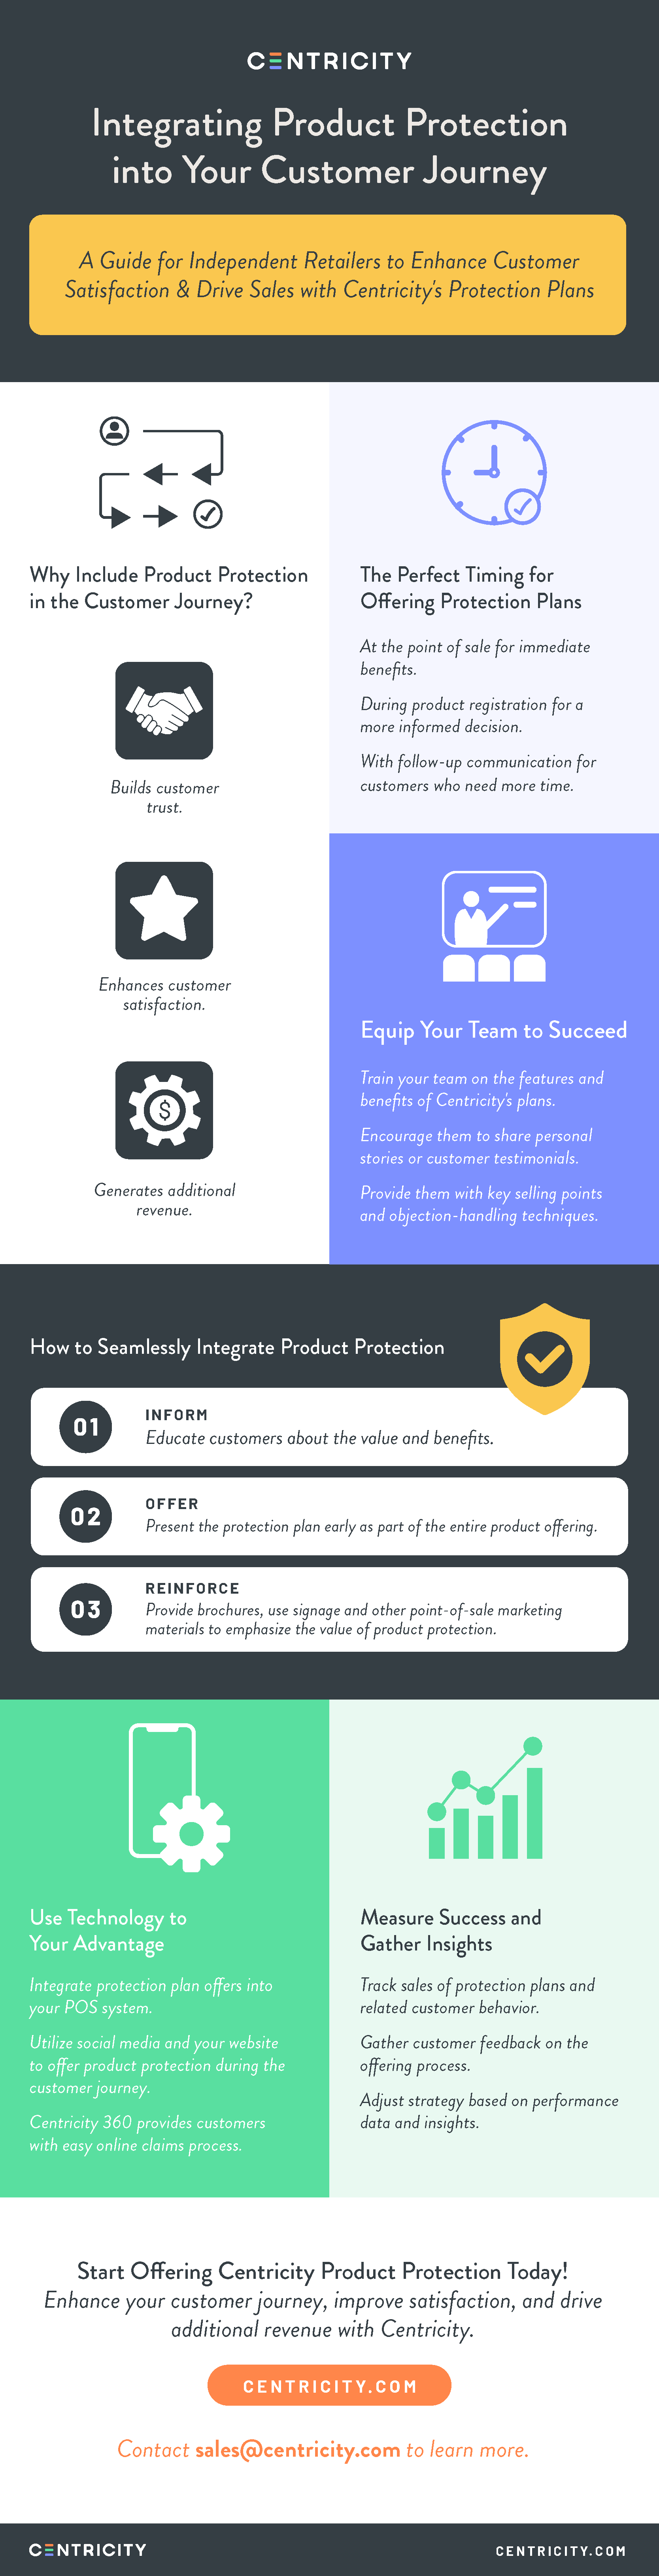 Infographic Integrating Product Protection